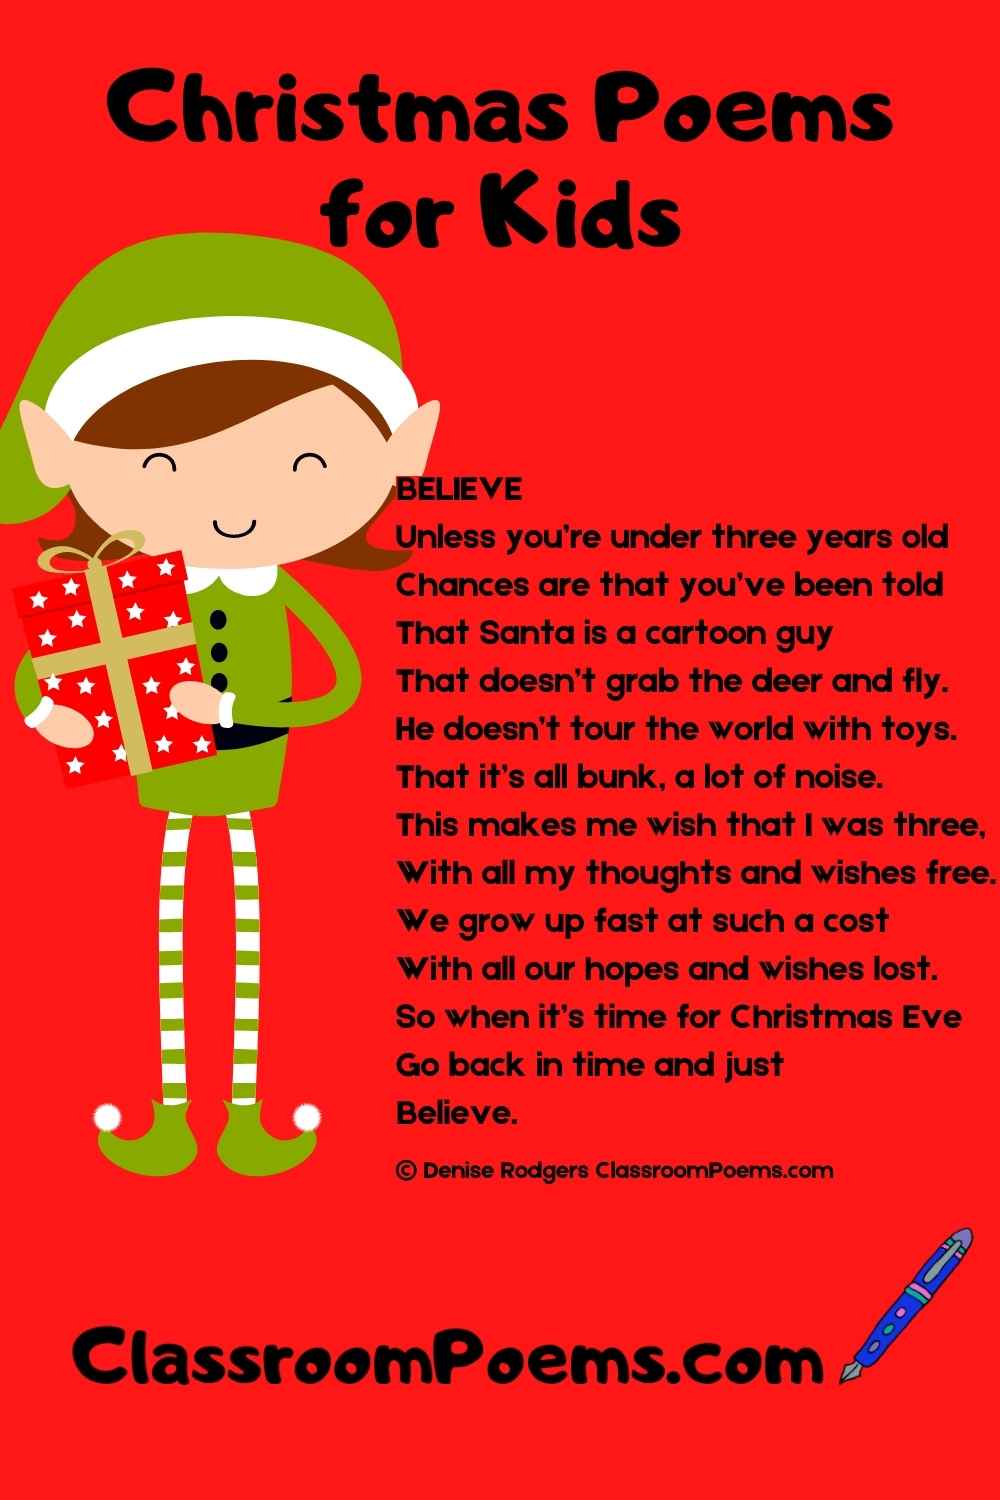 Christmas elf poem for kids by Denise Rodgers on ClassroomPoems.com.